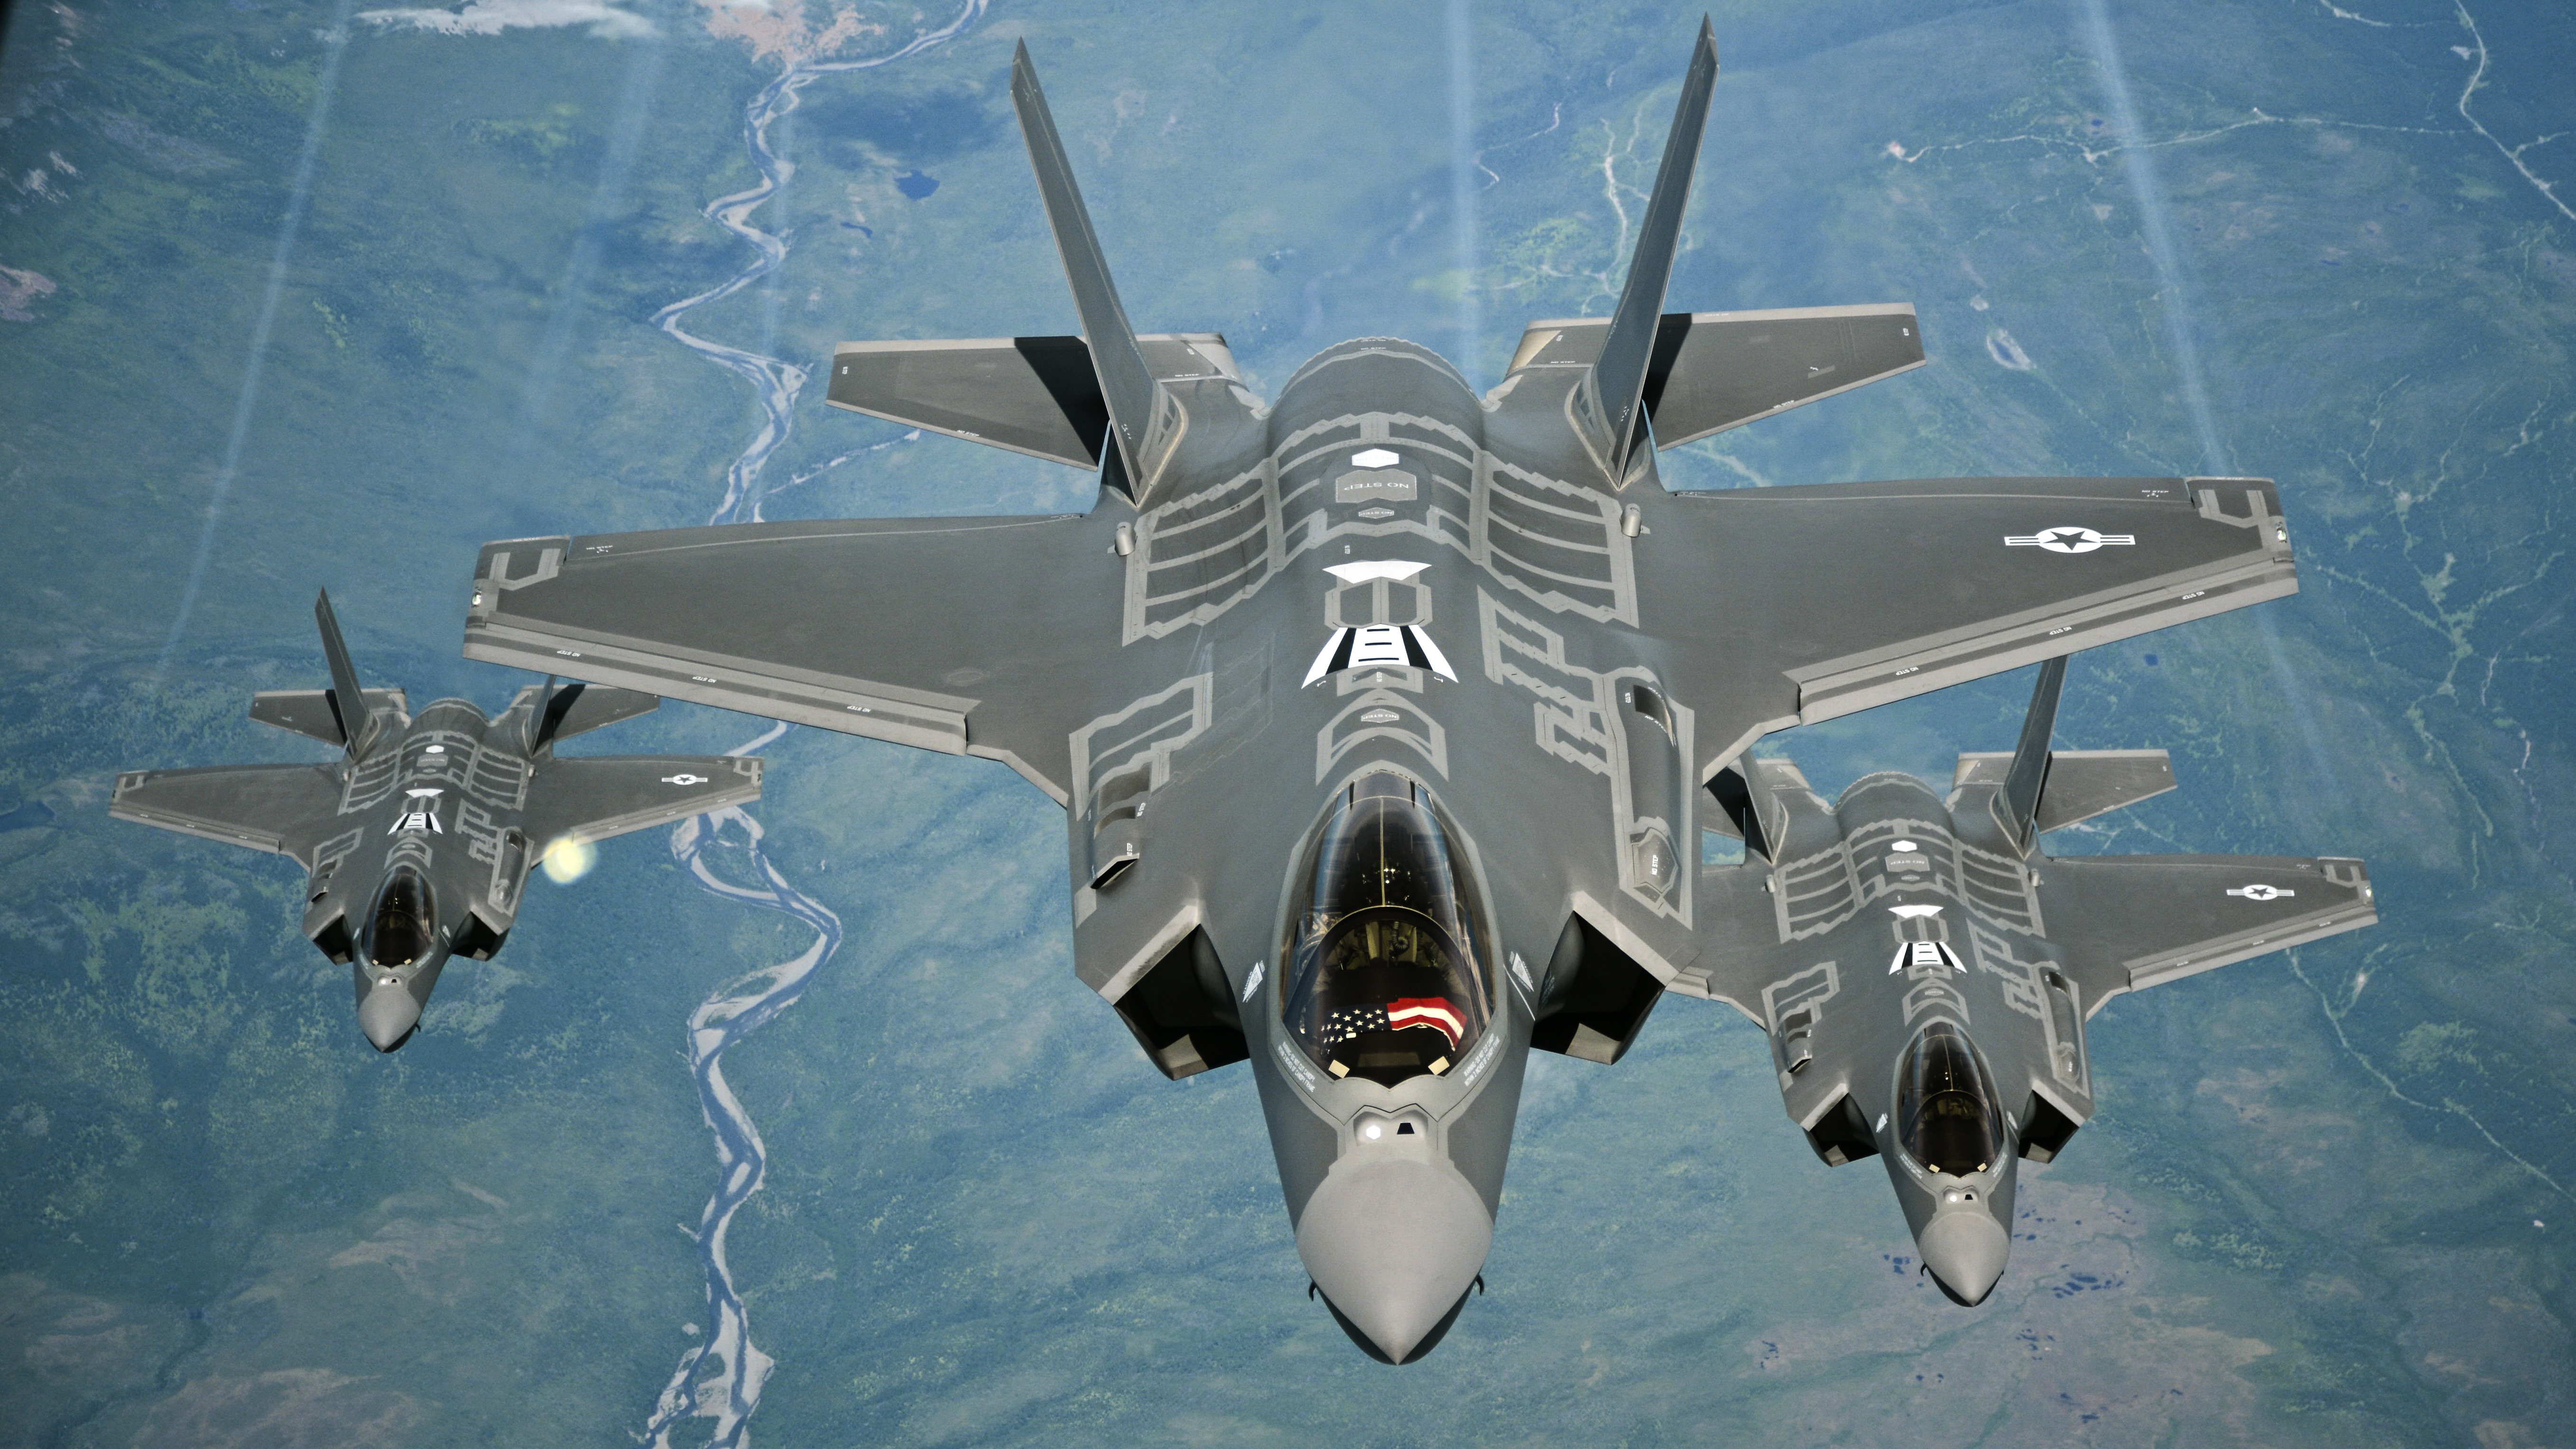 F-35A Lightning II aircraft receive fuel from a KC-10 Extender from Travis Air Force Base, Calif. by US Air Force